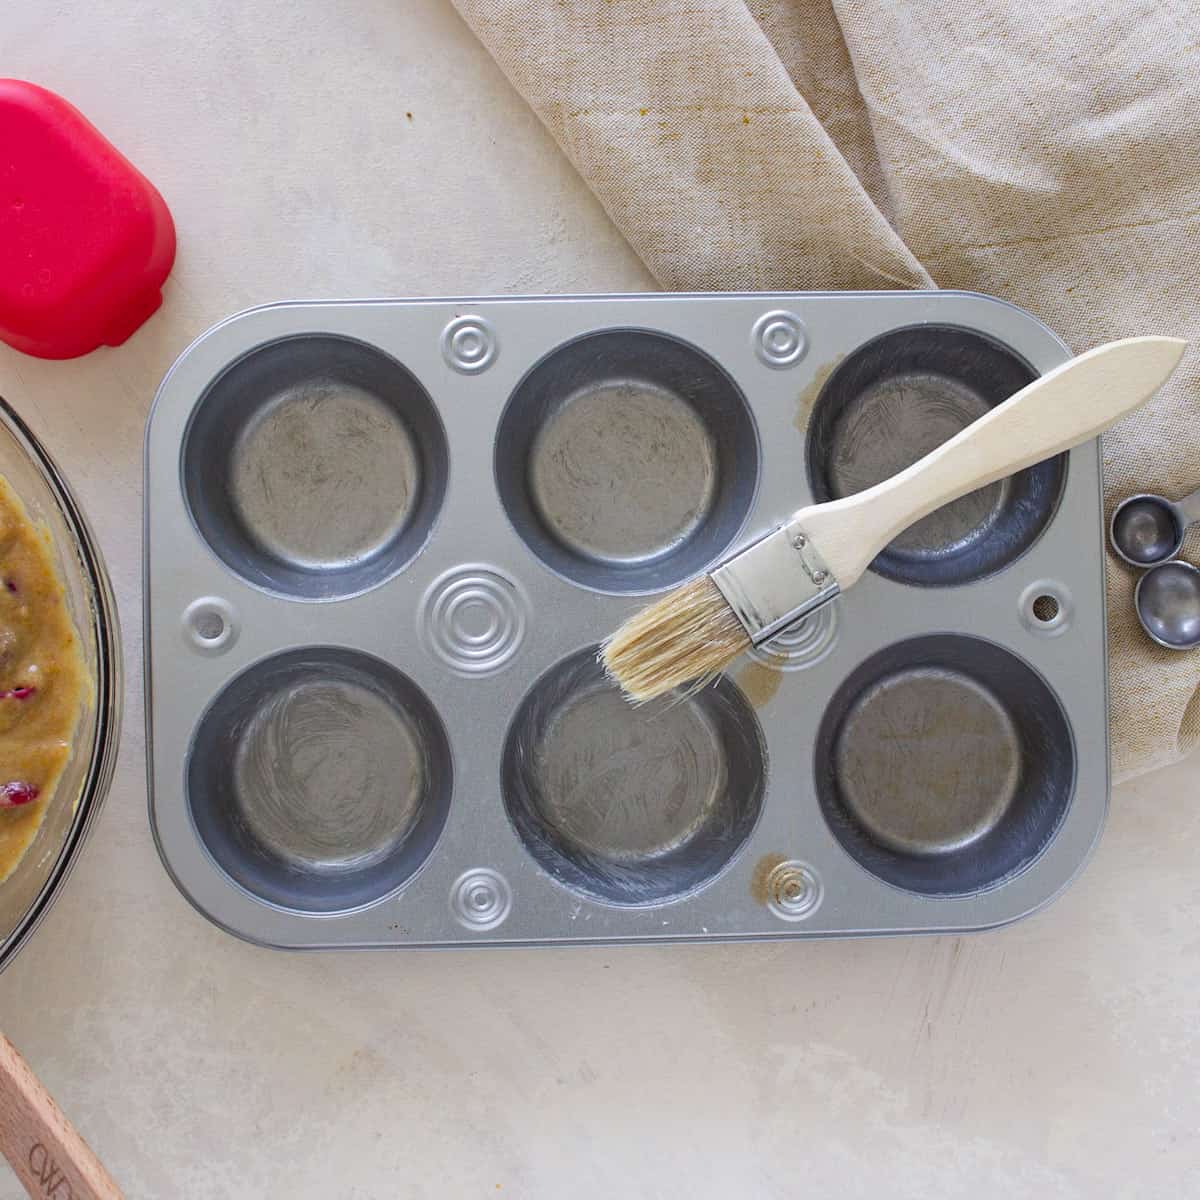 A six cell muffin tin that has been brushed with butter and a pastry brush sitting on top.